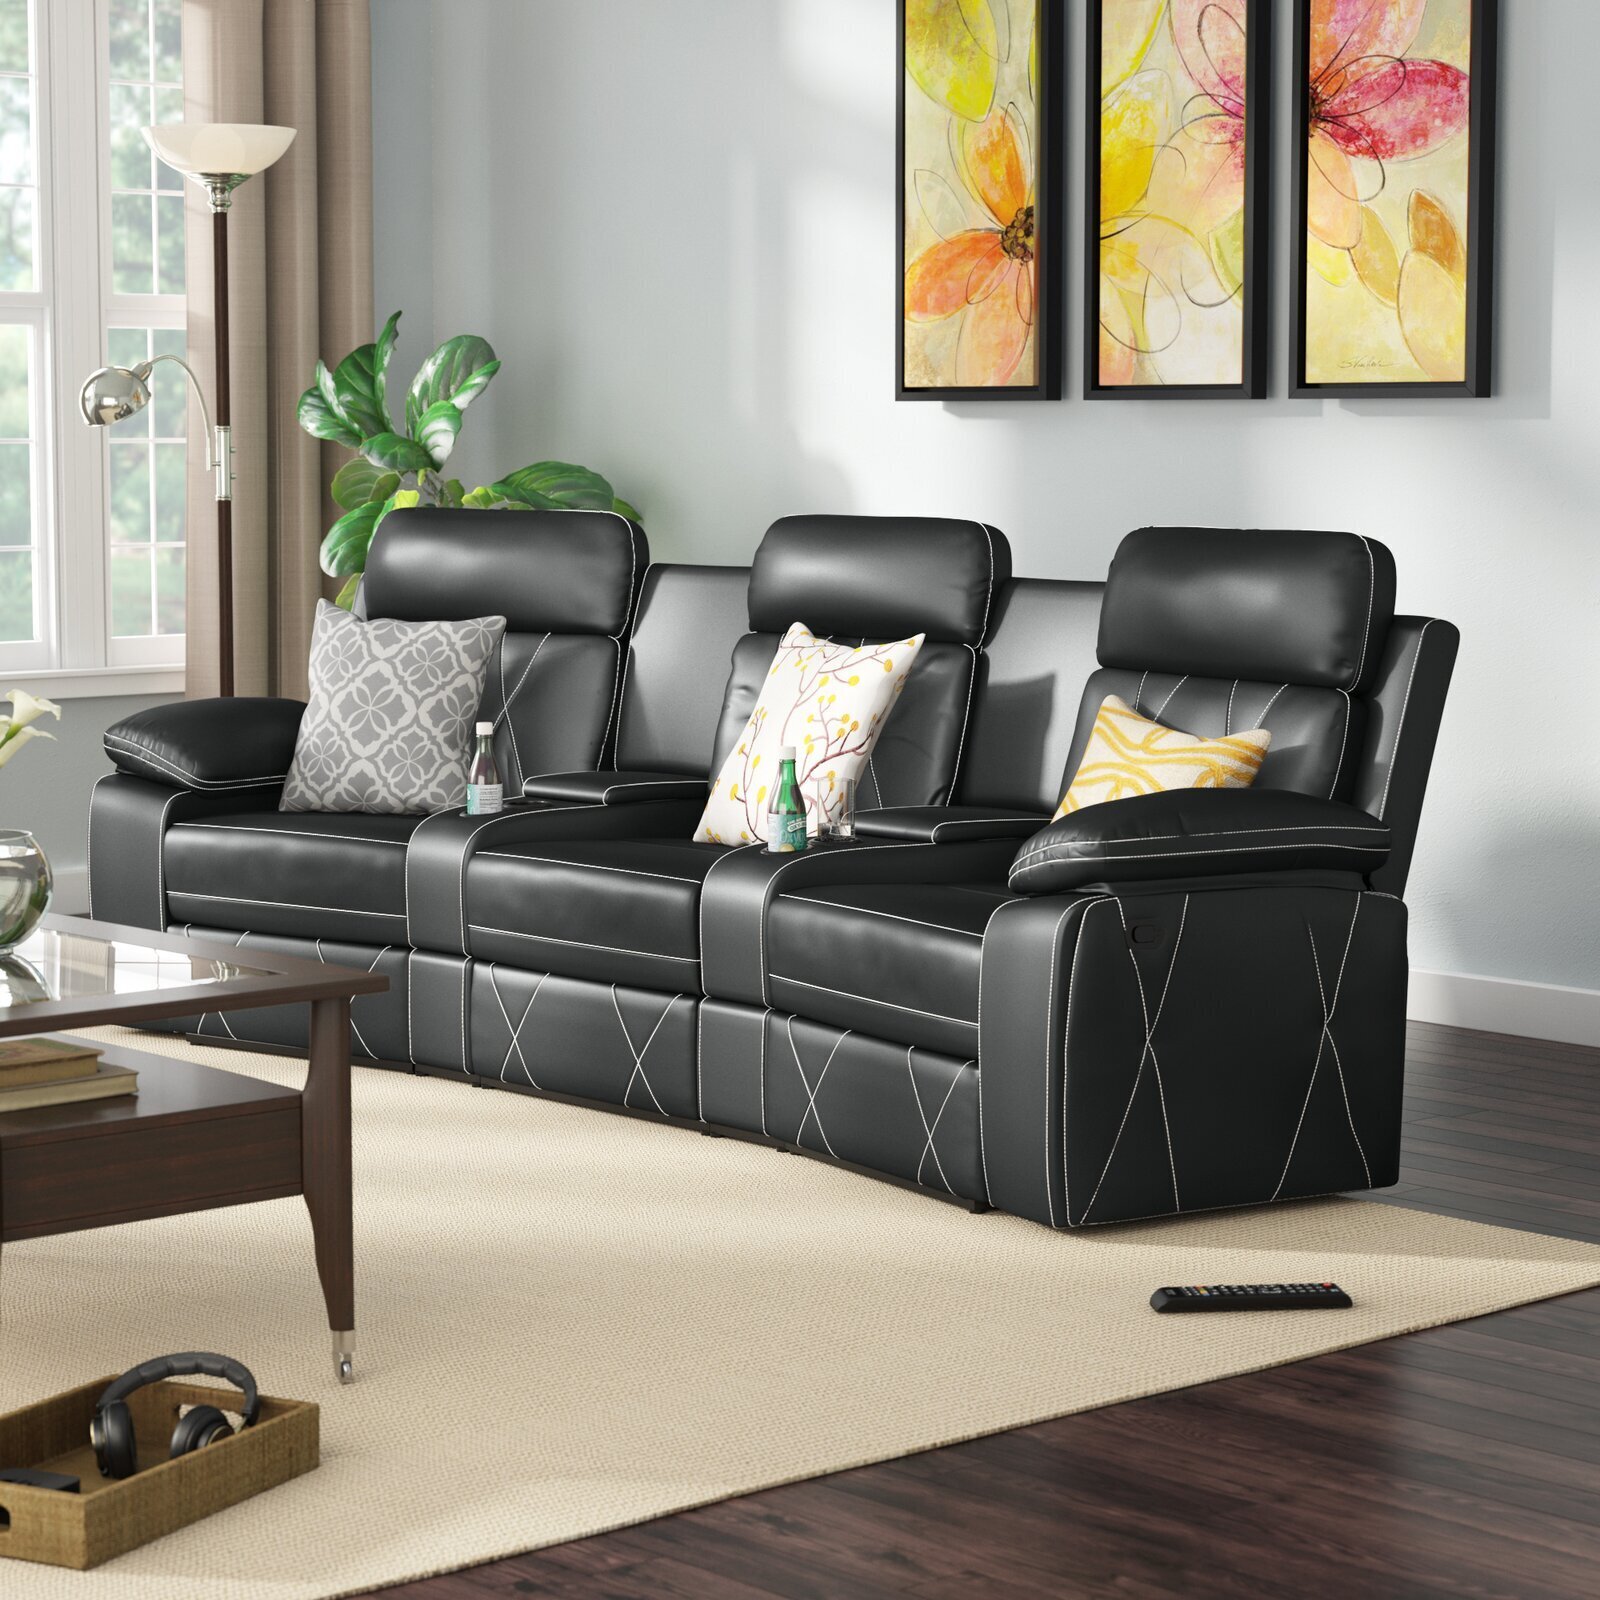 Contemporary Movie Chairs For Basement